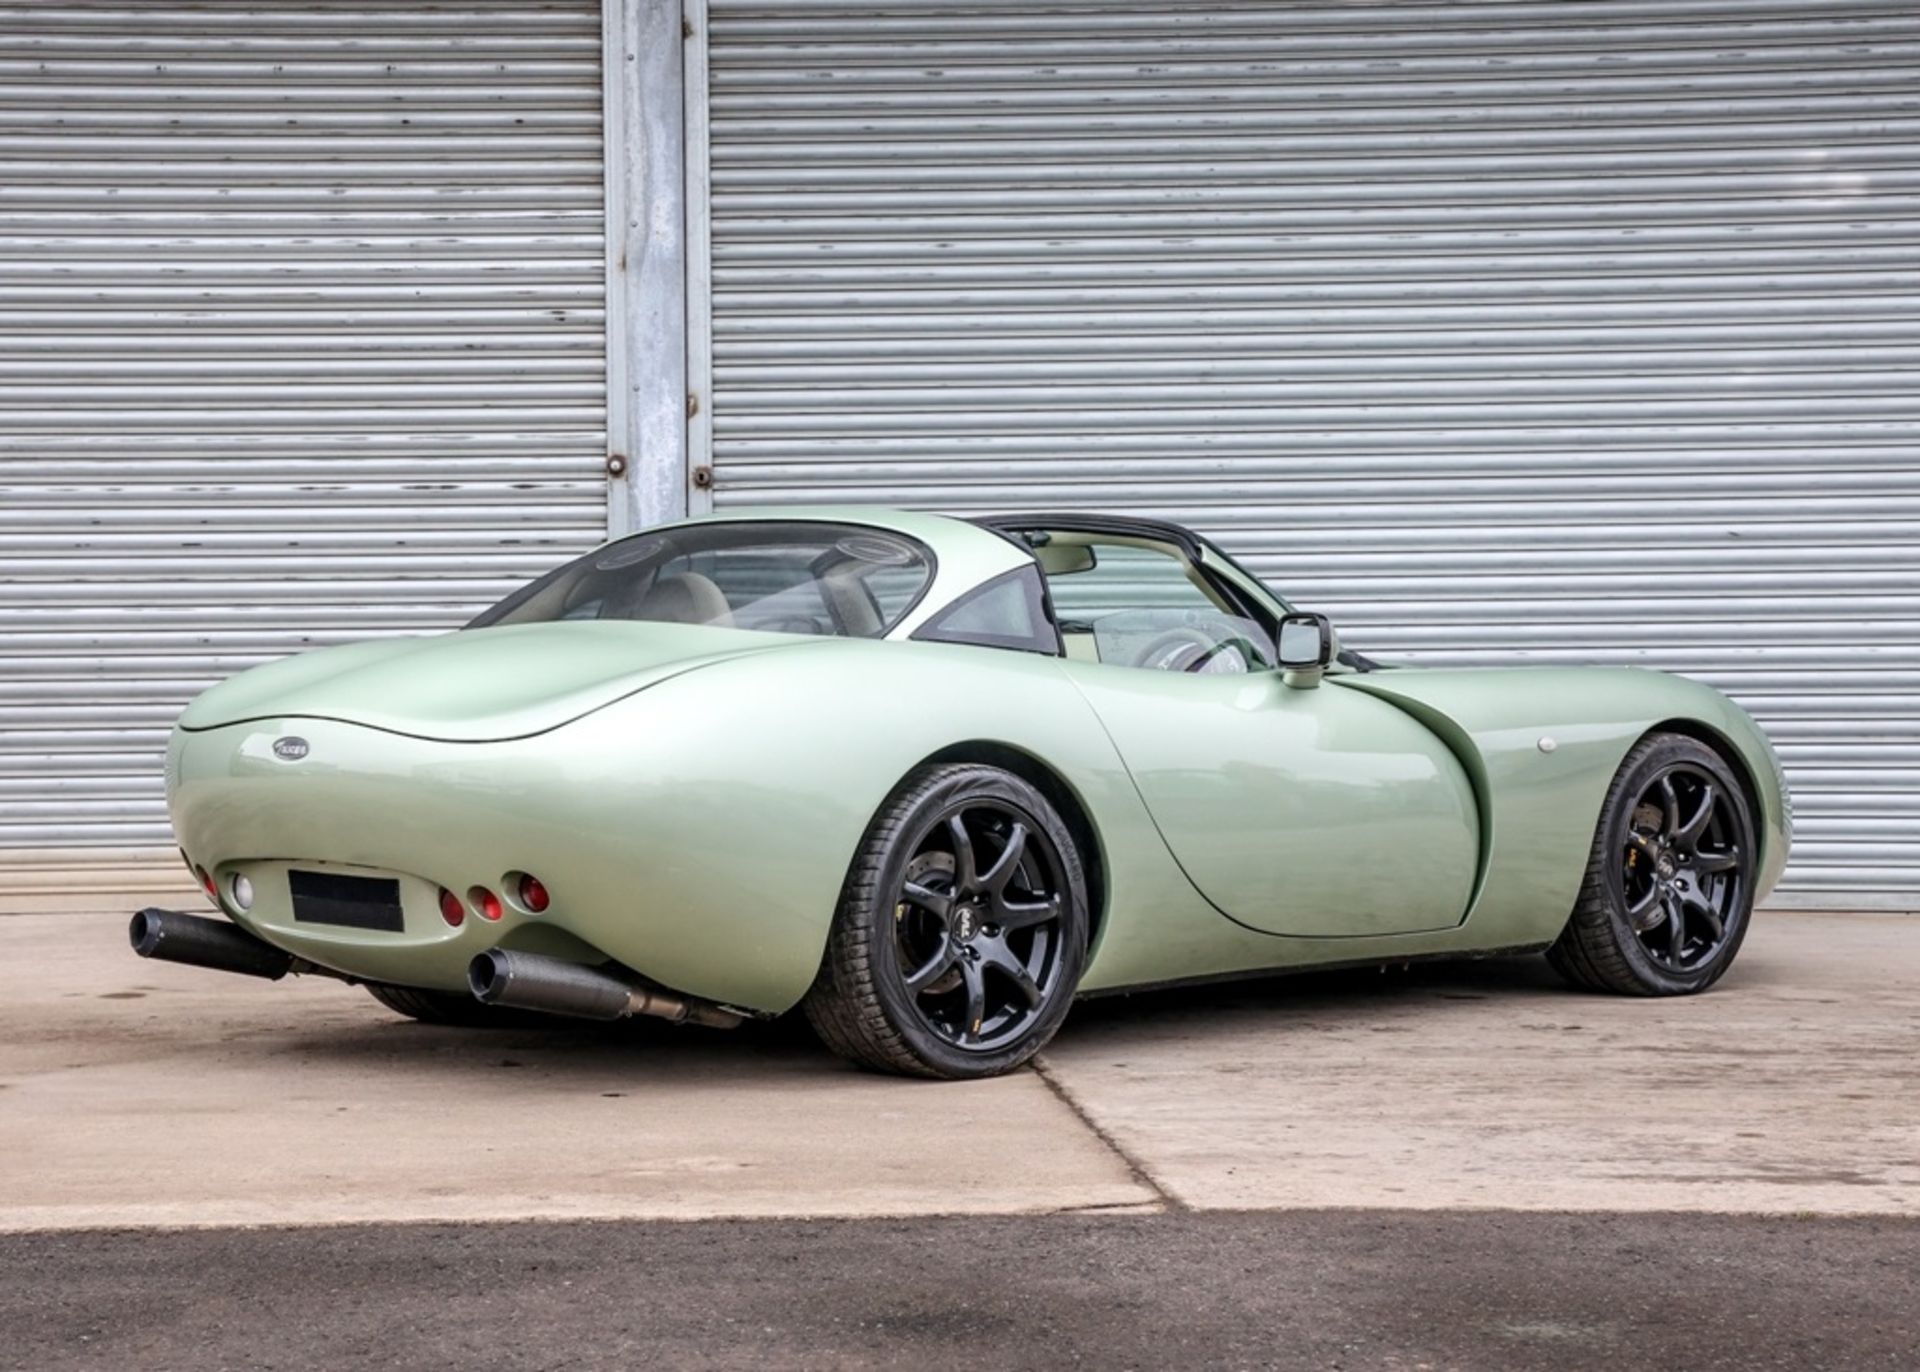 2001 TVR Tuscan Speed Six - Image 3 of 15